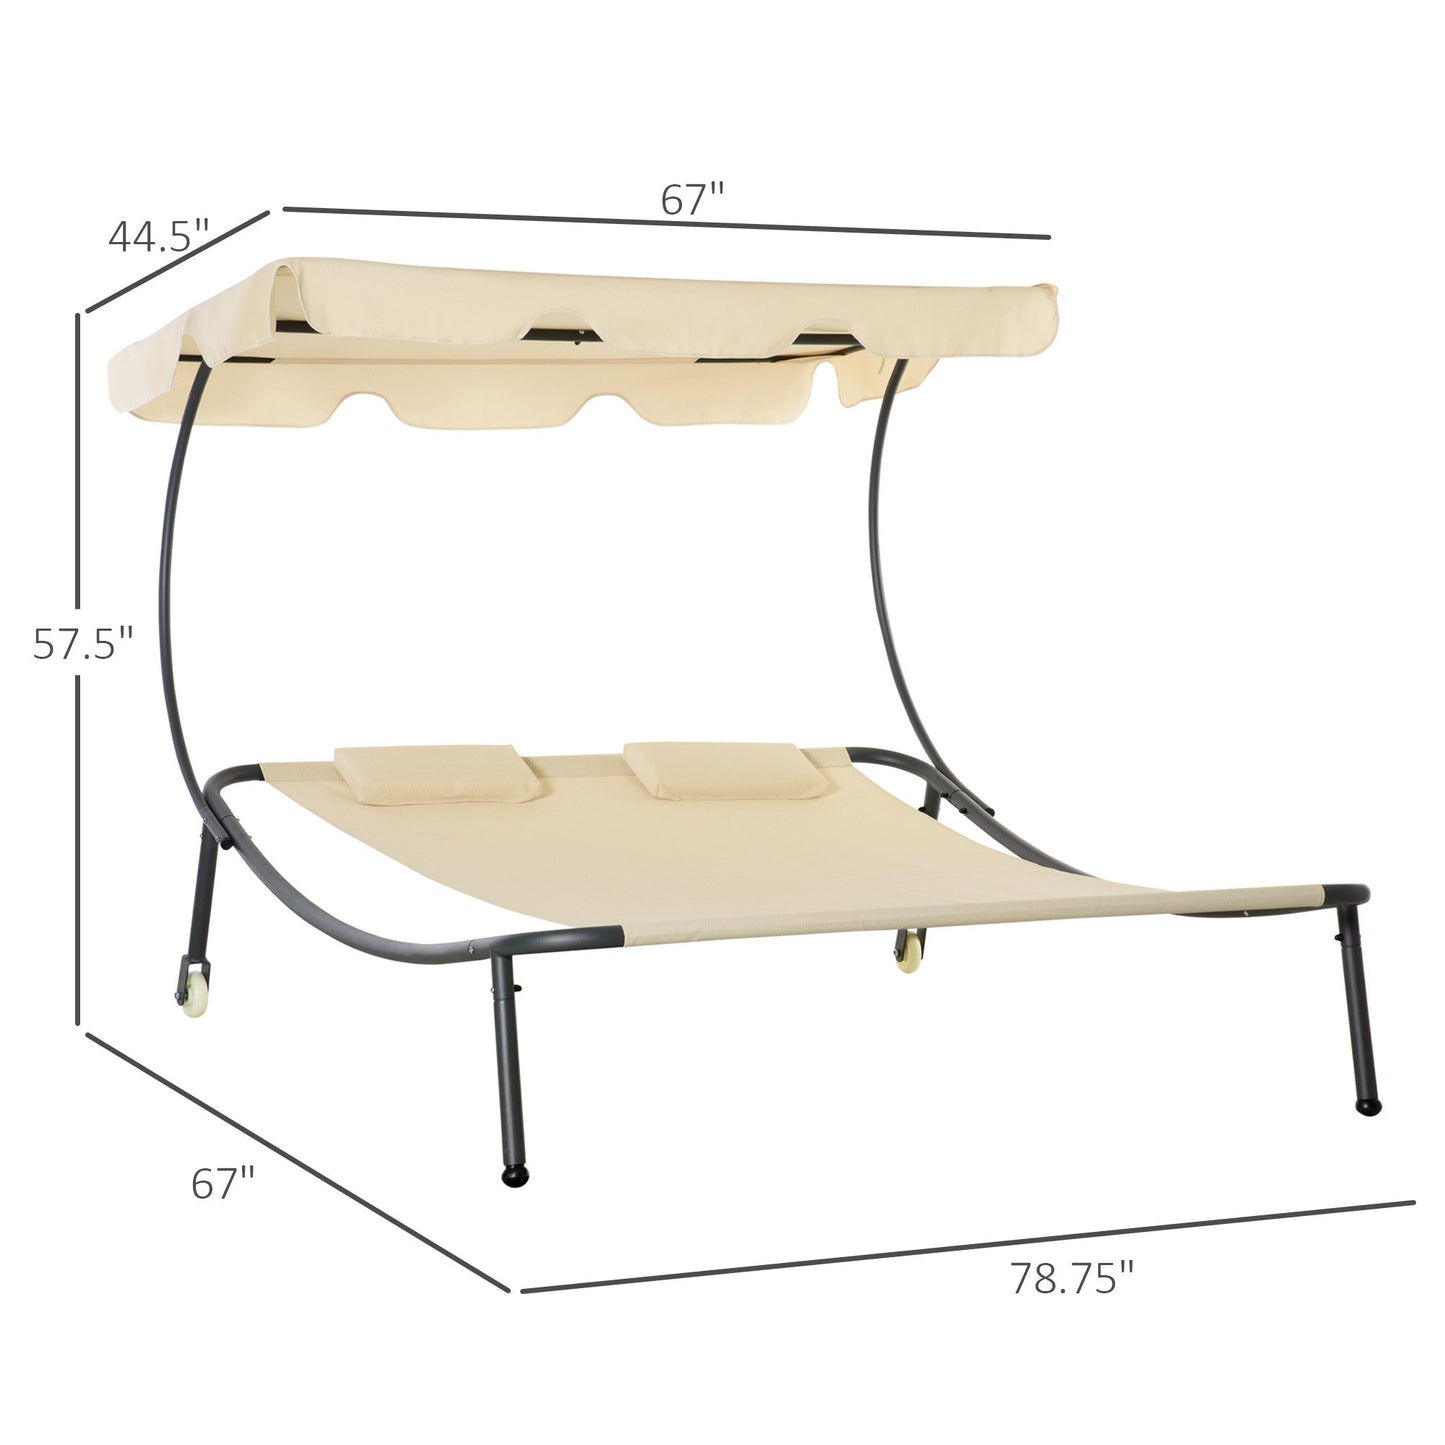 Outdoor and Garden-Double Chaise Lounge Chair Outdoor with Adjustable Canopy and Pillow, Hammock Bed Daybed for Patio, Garden, Poolside, Beige - Outdoor Style Company